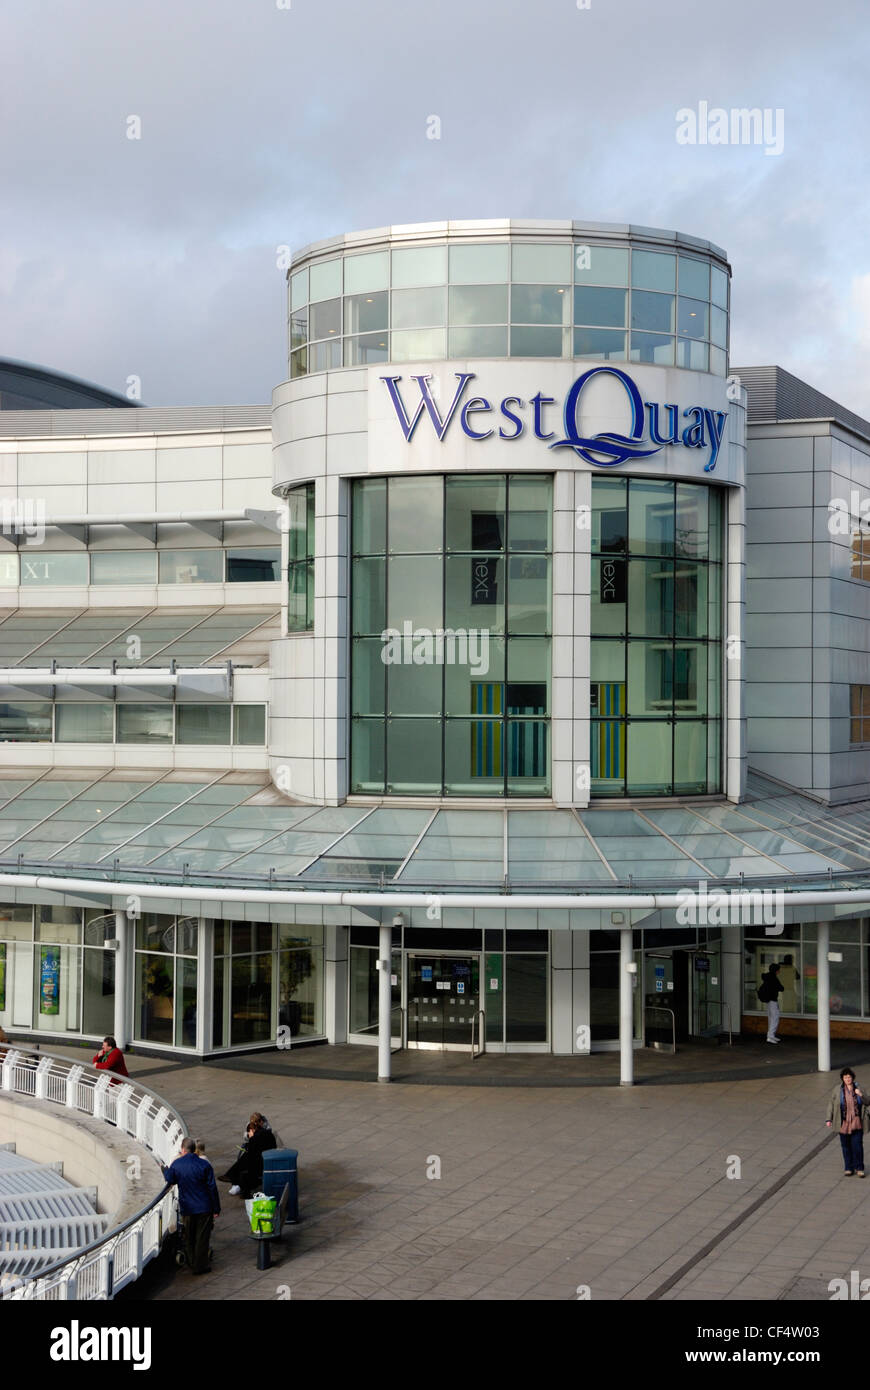 Der West Quay Shopping Centre in Southampton. Stockfoto